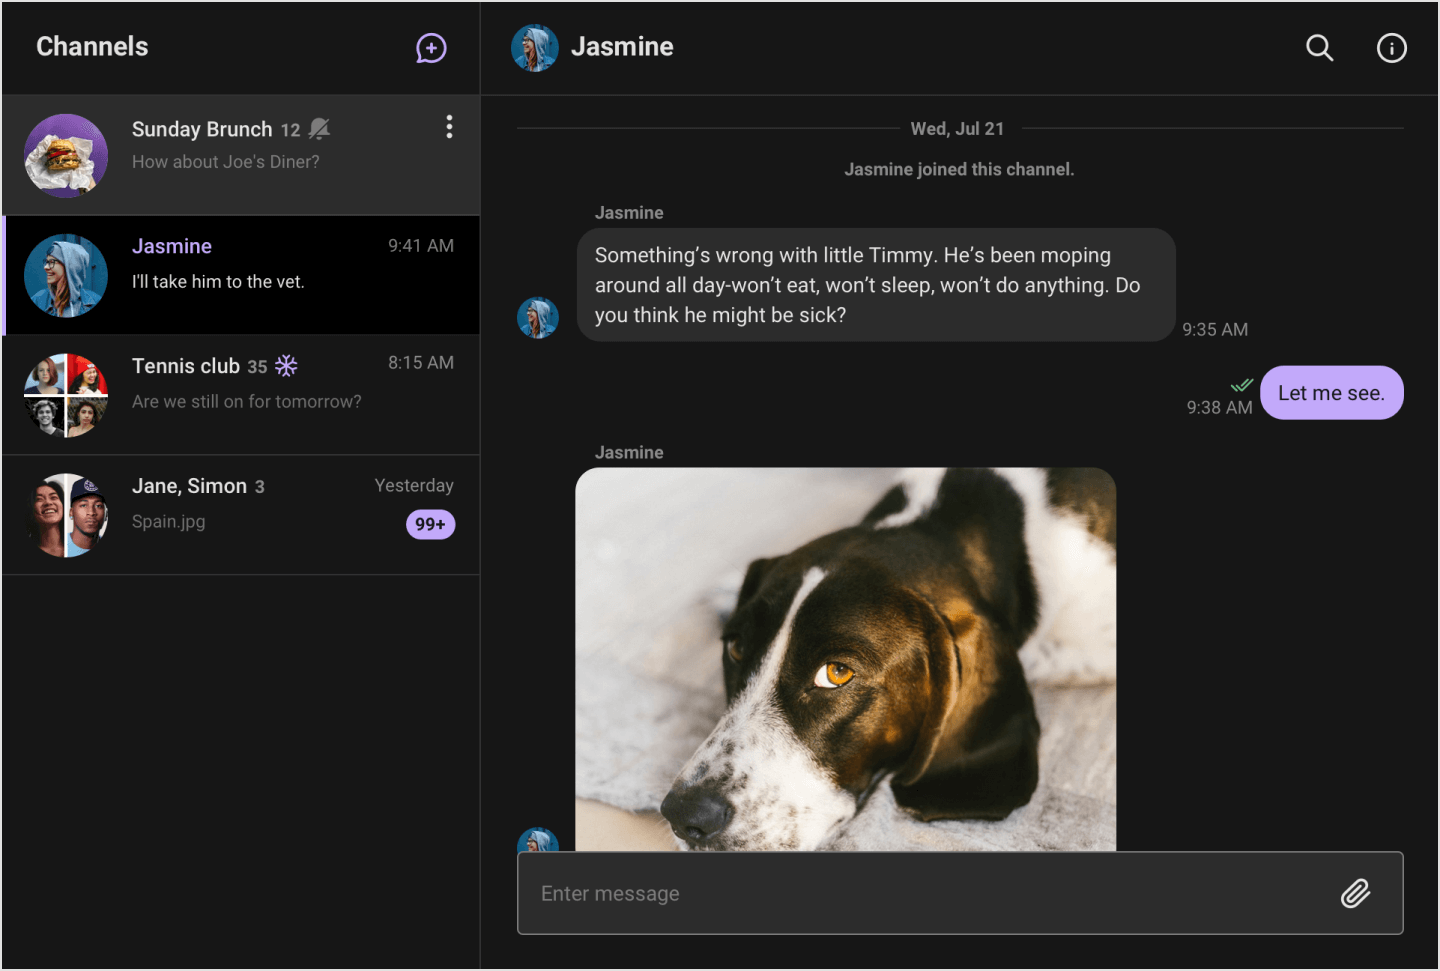 Image|Two UIKit views on the Dark theme are shown: list of channels, chat view.